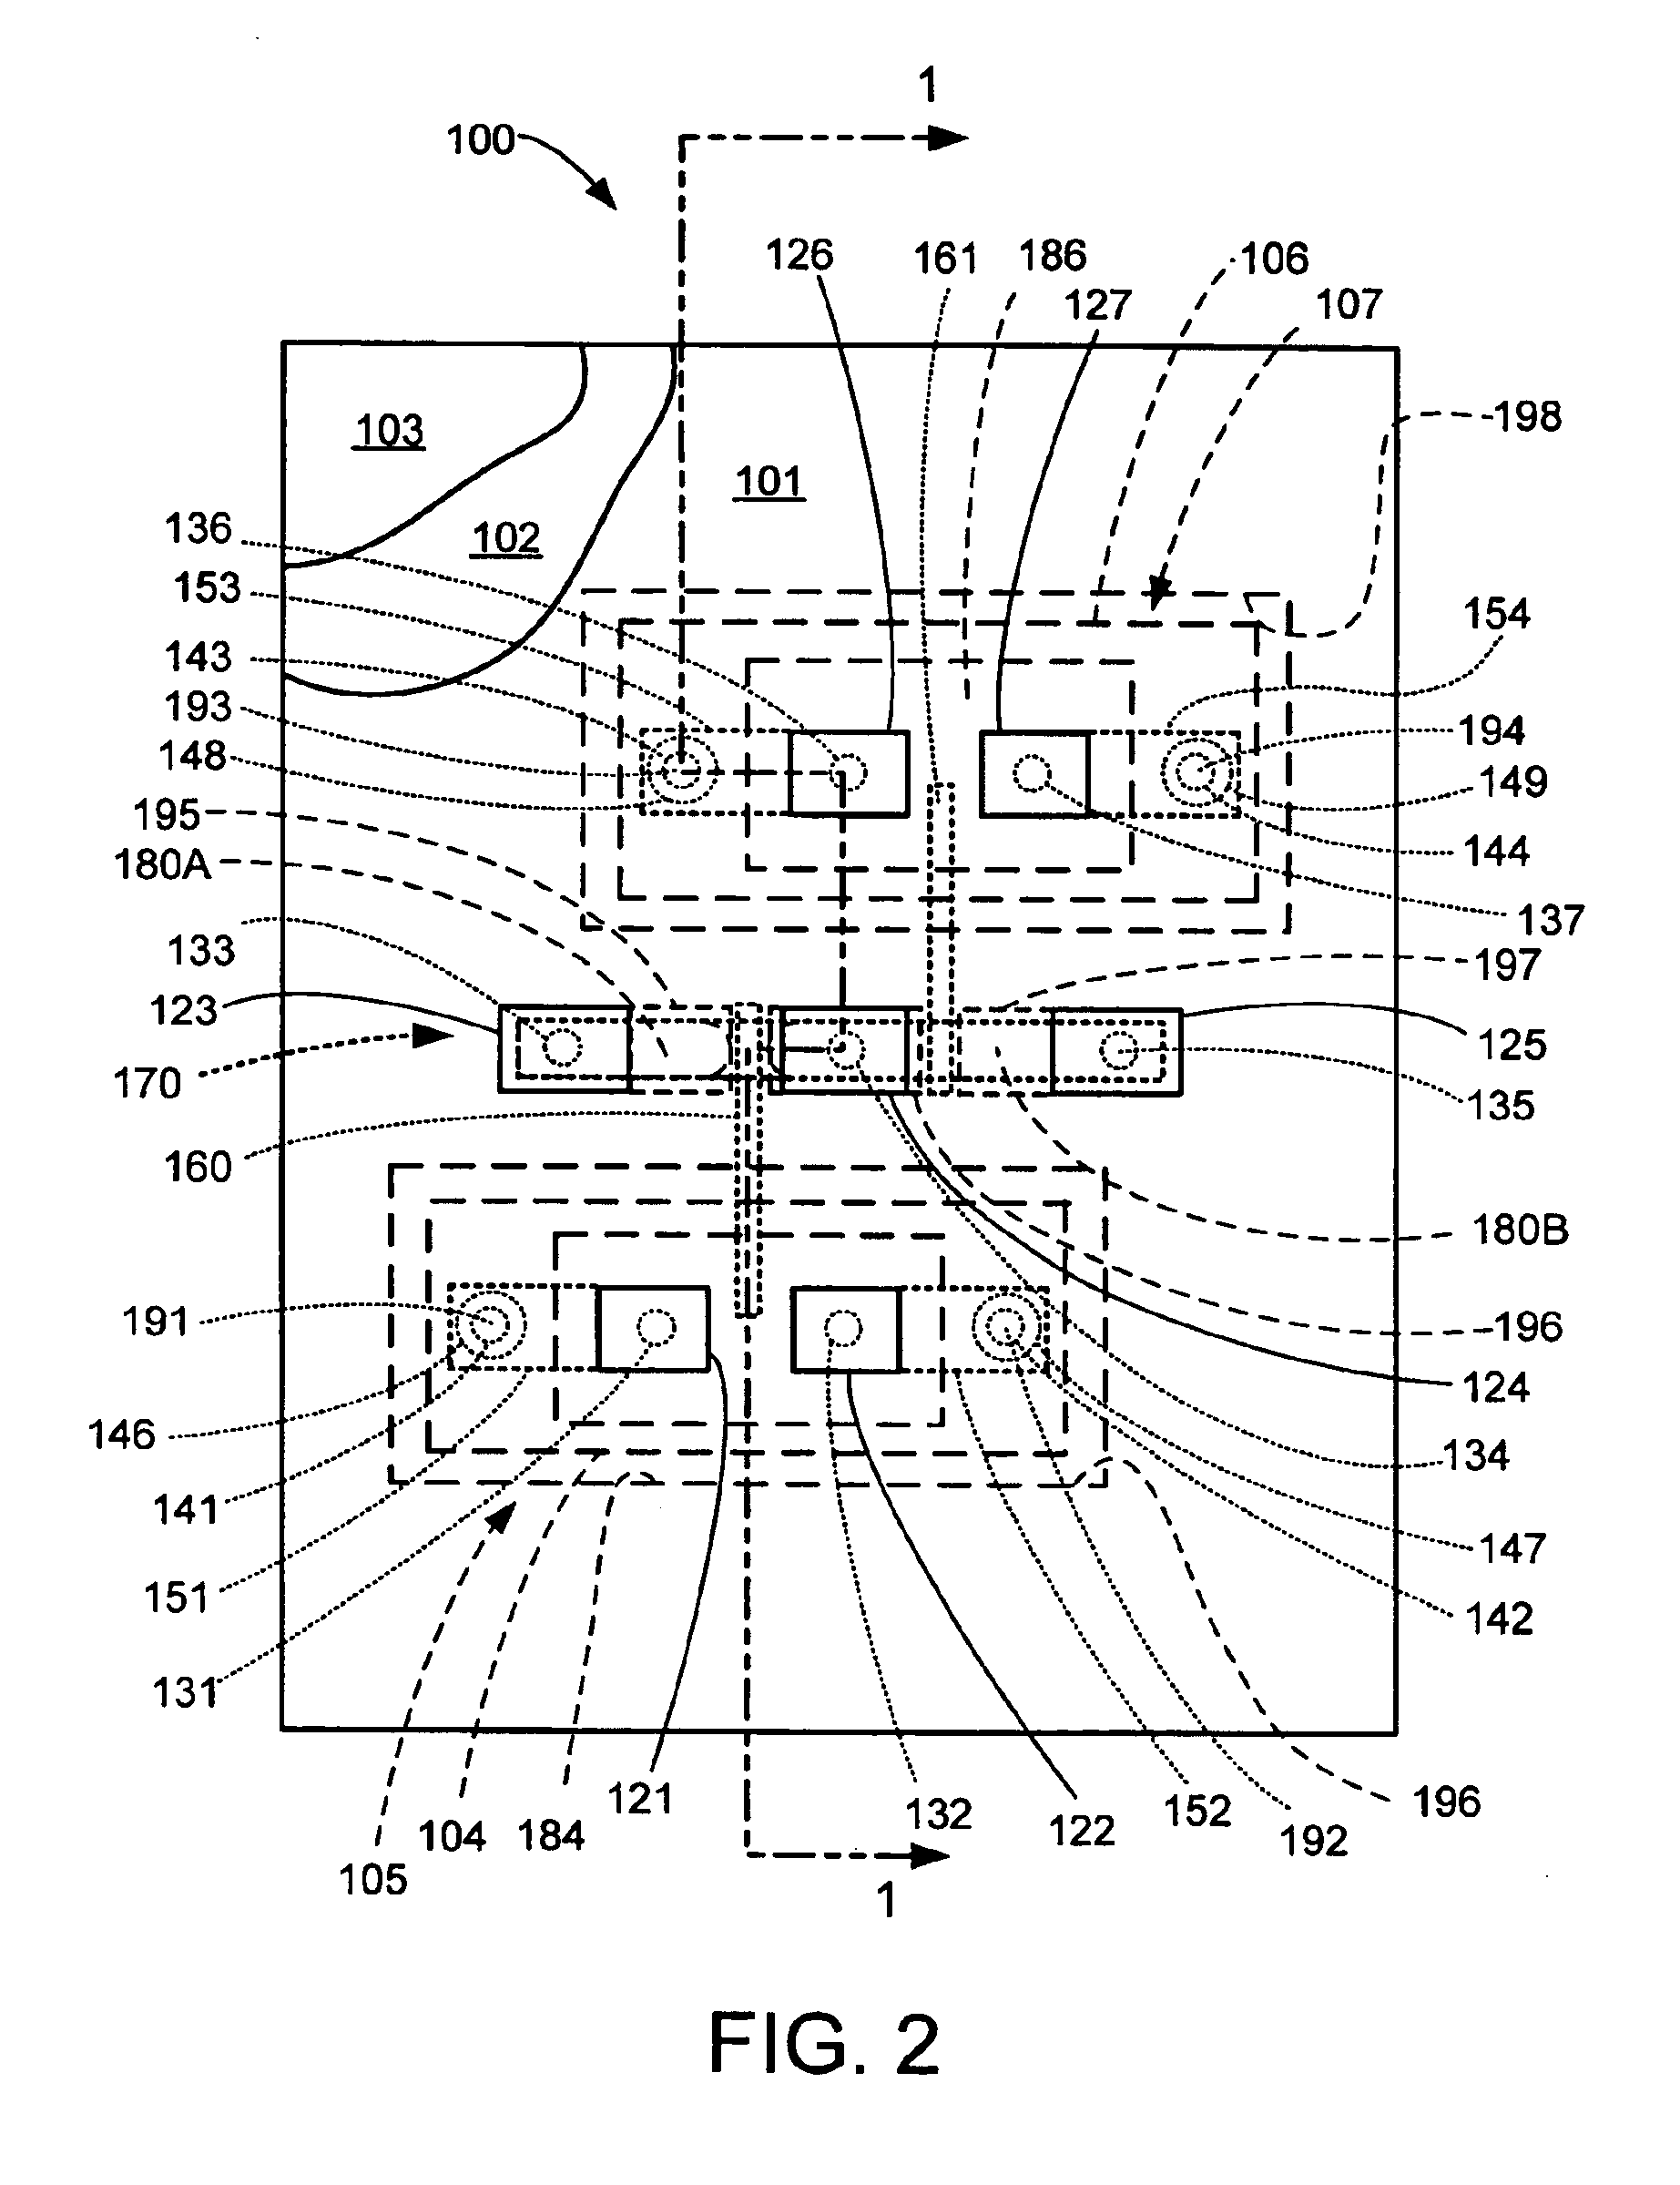 Surface joined multi-substrate liquid metal switching device